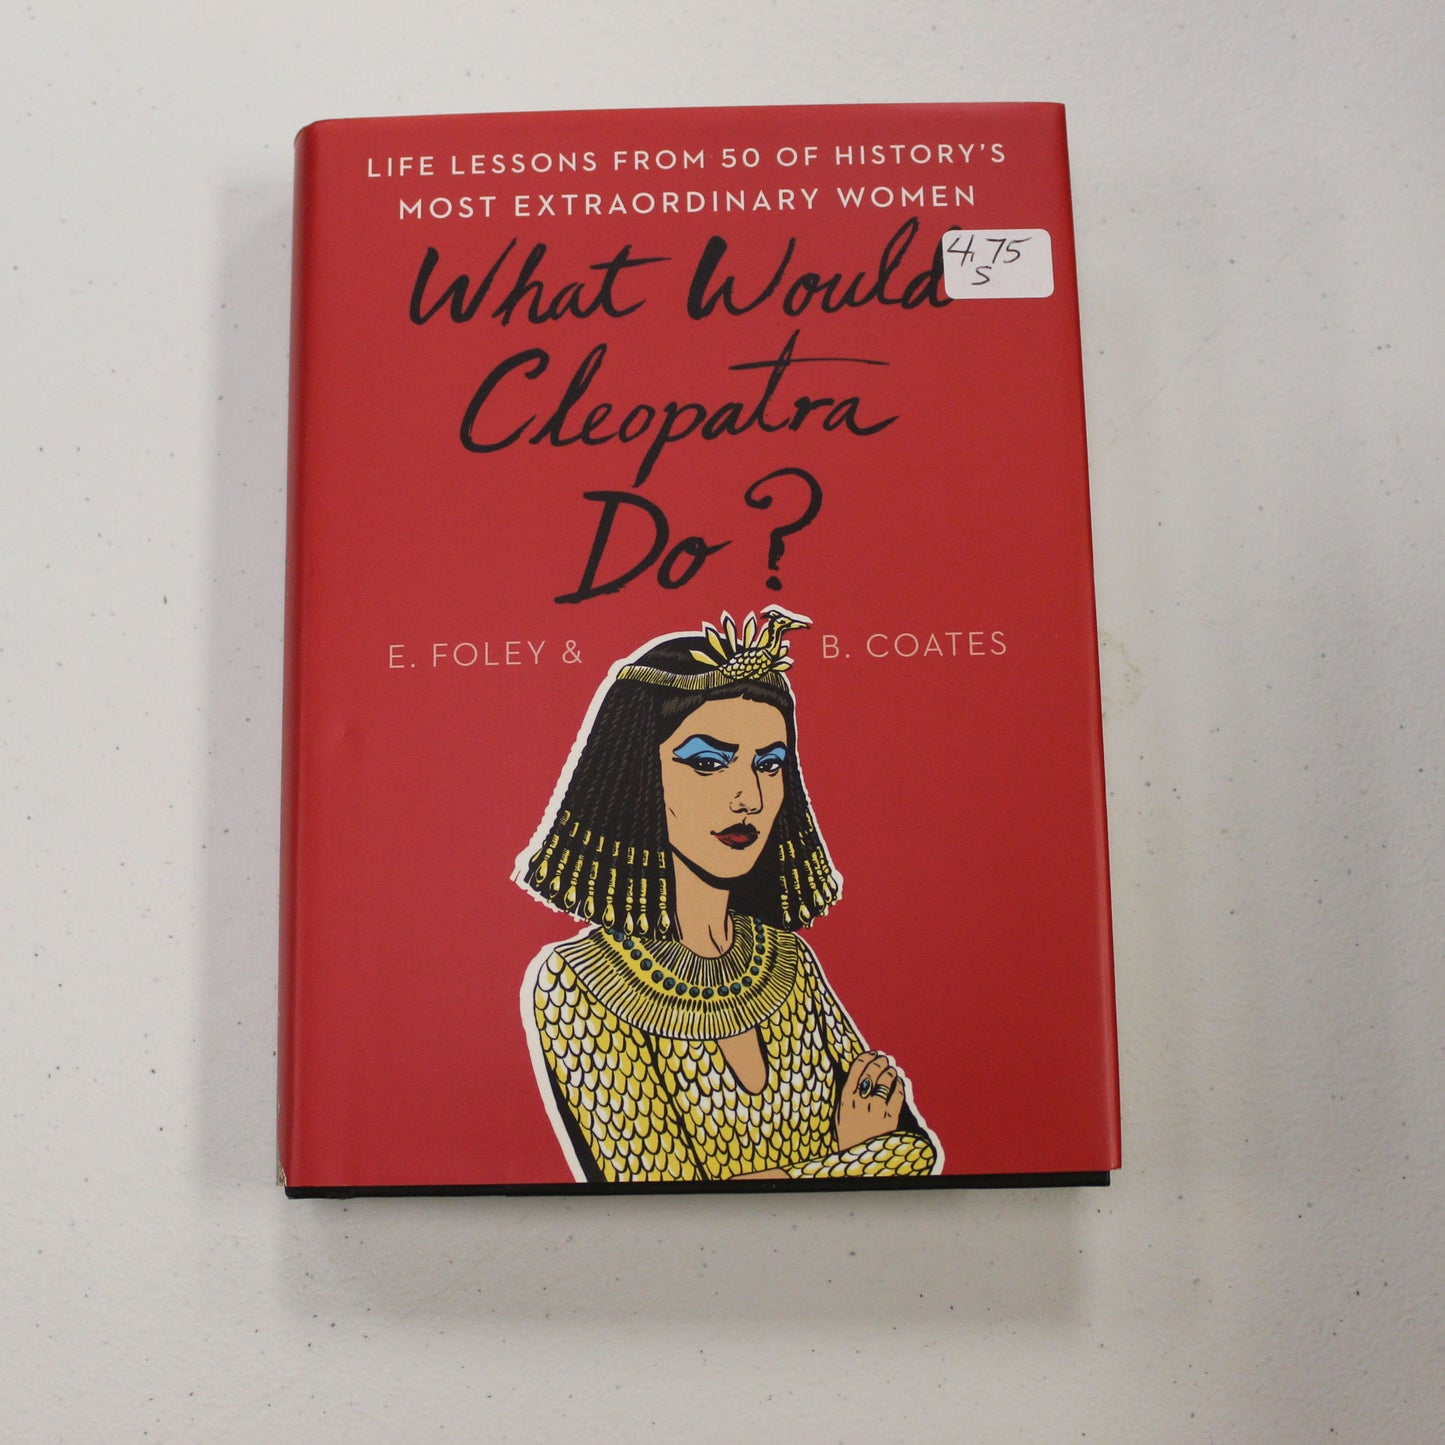 WHAT WOULD CLEOPATRA DO?